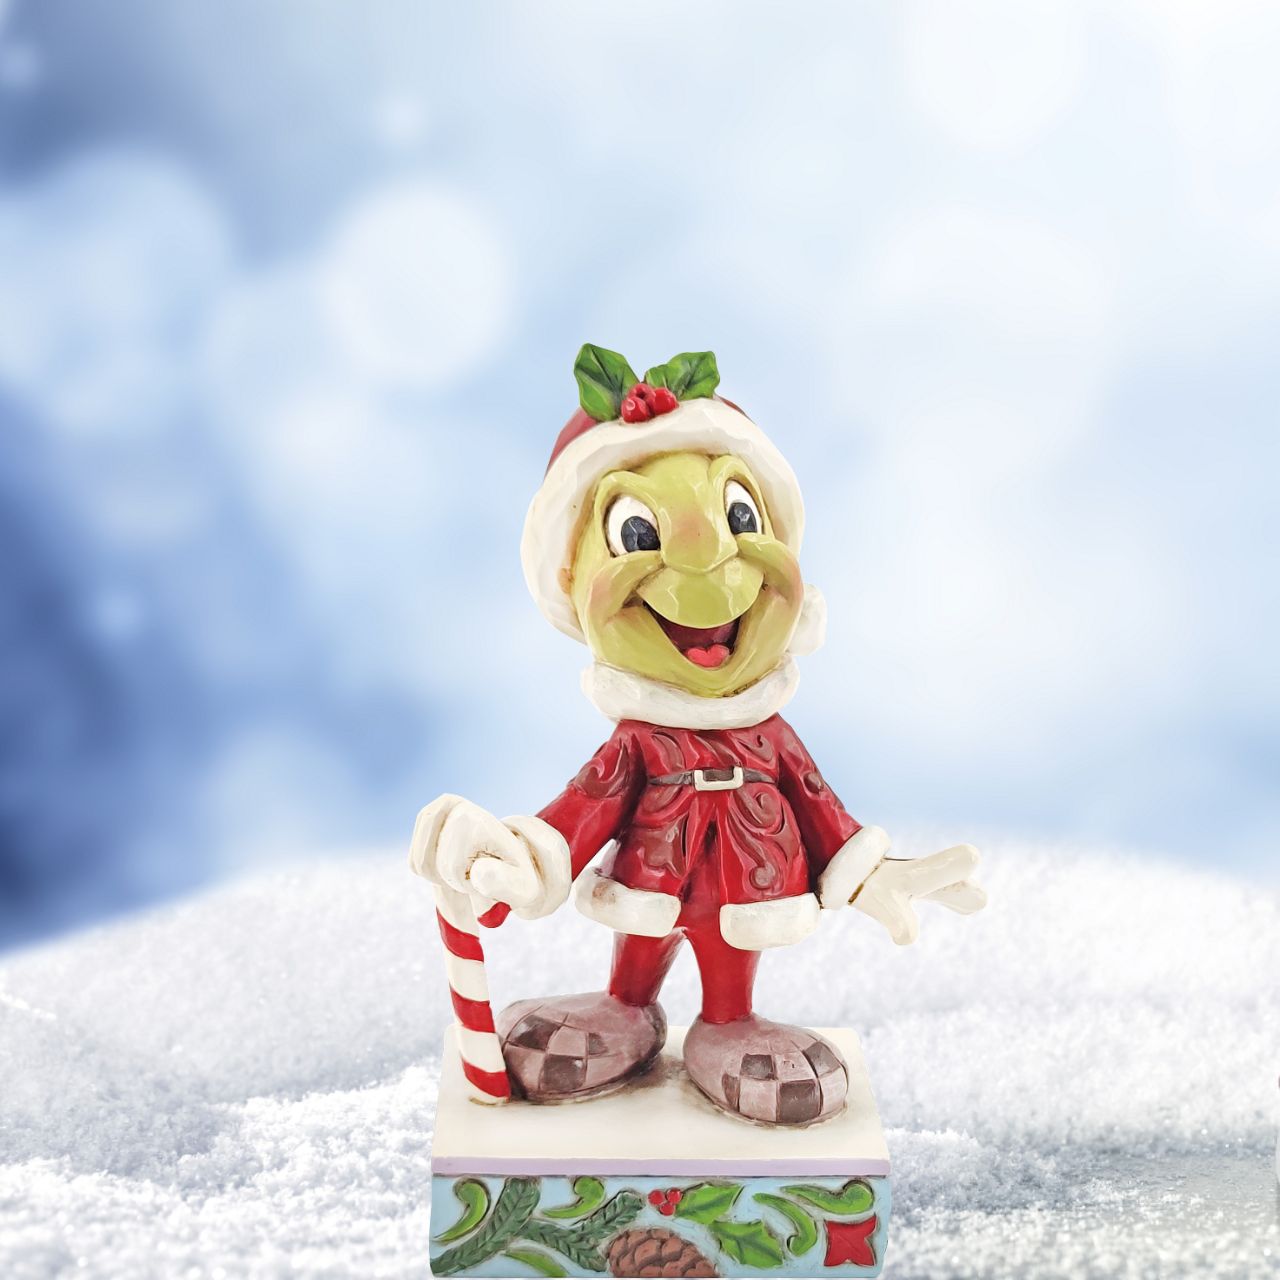 Jim Shore Disney Traditions Christmas Jiminy Cricket Figurine  Be Wise and Be Merry  This year, Jiminy Cricket lets Christmas be his guide. Donning Santa's coat and boots the charming little insect hopes to turn all your wishes true this season. Walking with a candy cane, the cricket smiles brightly in this Jim Shore classic.